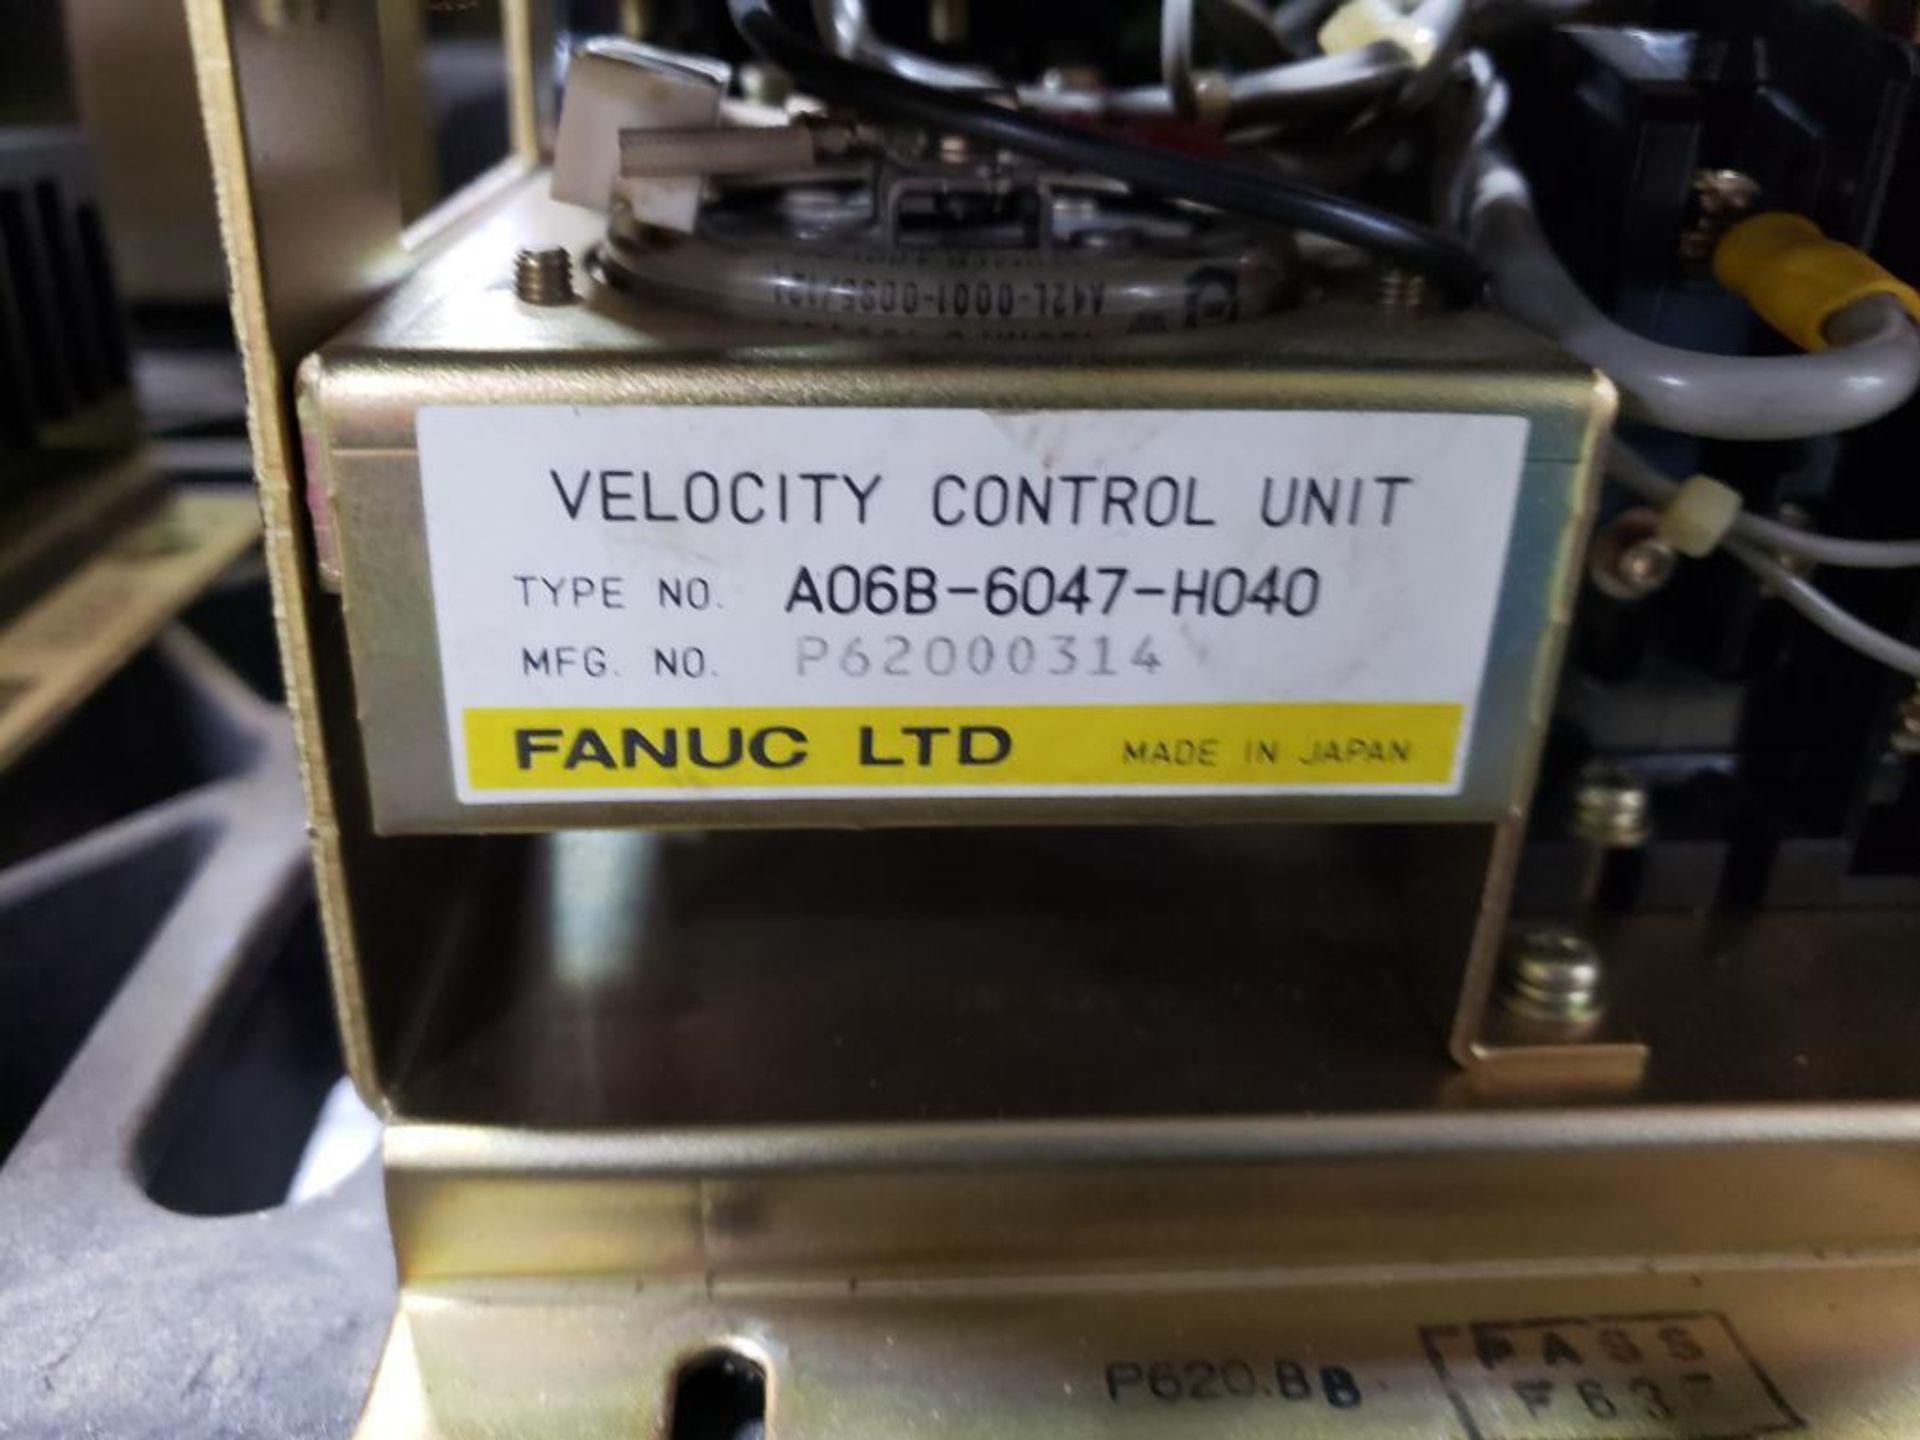 Fanuc velocity control unit model A06B-6047-H040. Pulled from working machine. - Image 3 of 5